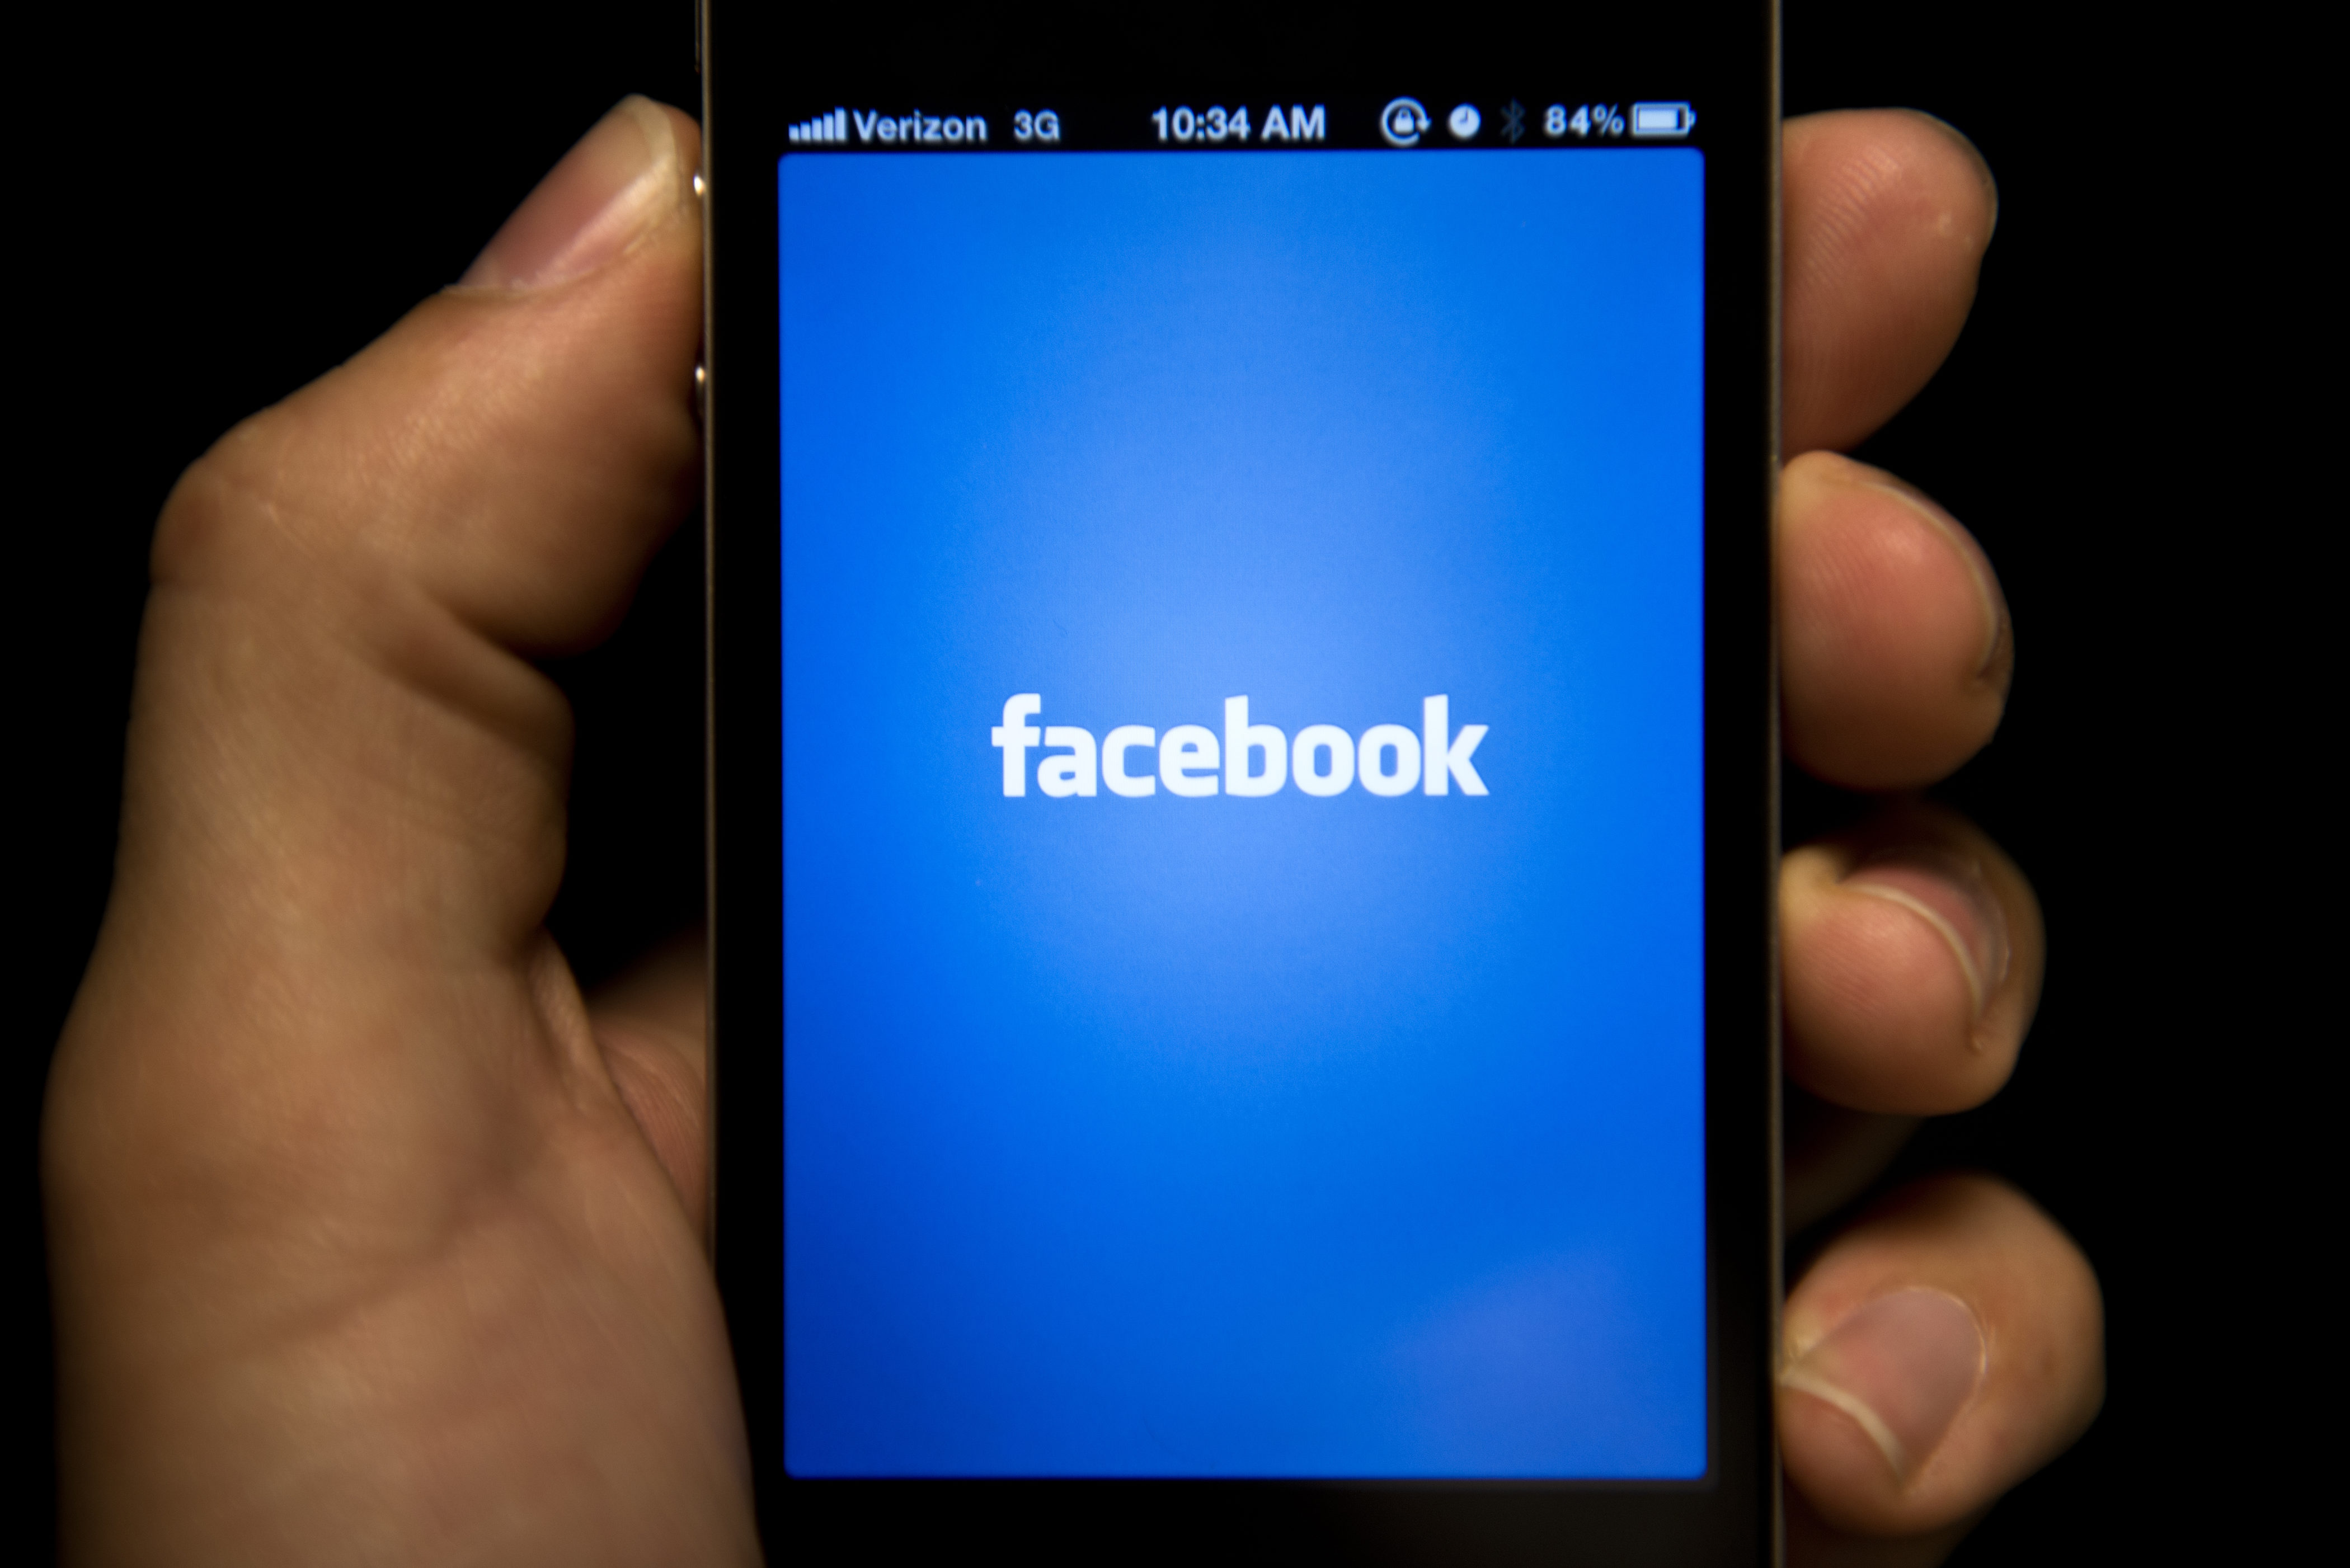 A view of an Apple iPhone displaying the Facebook app's splash screen, May 10, 2012 in Washington. (Brendan Smialowski—AFP/Getty Images)